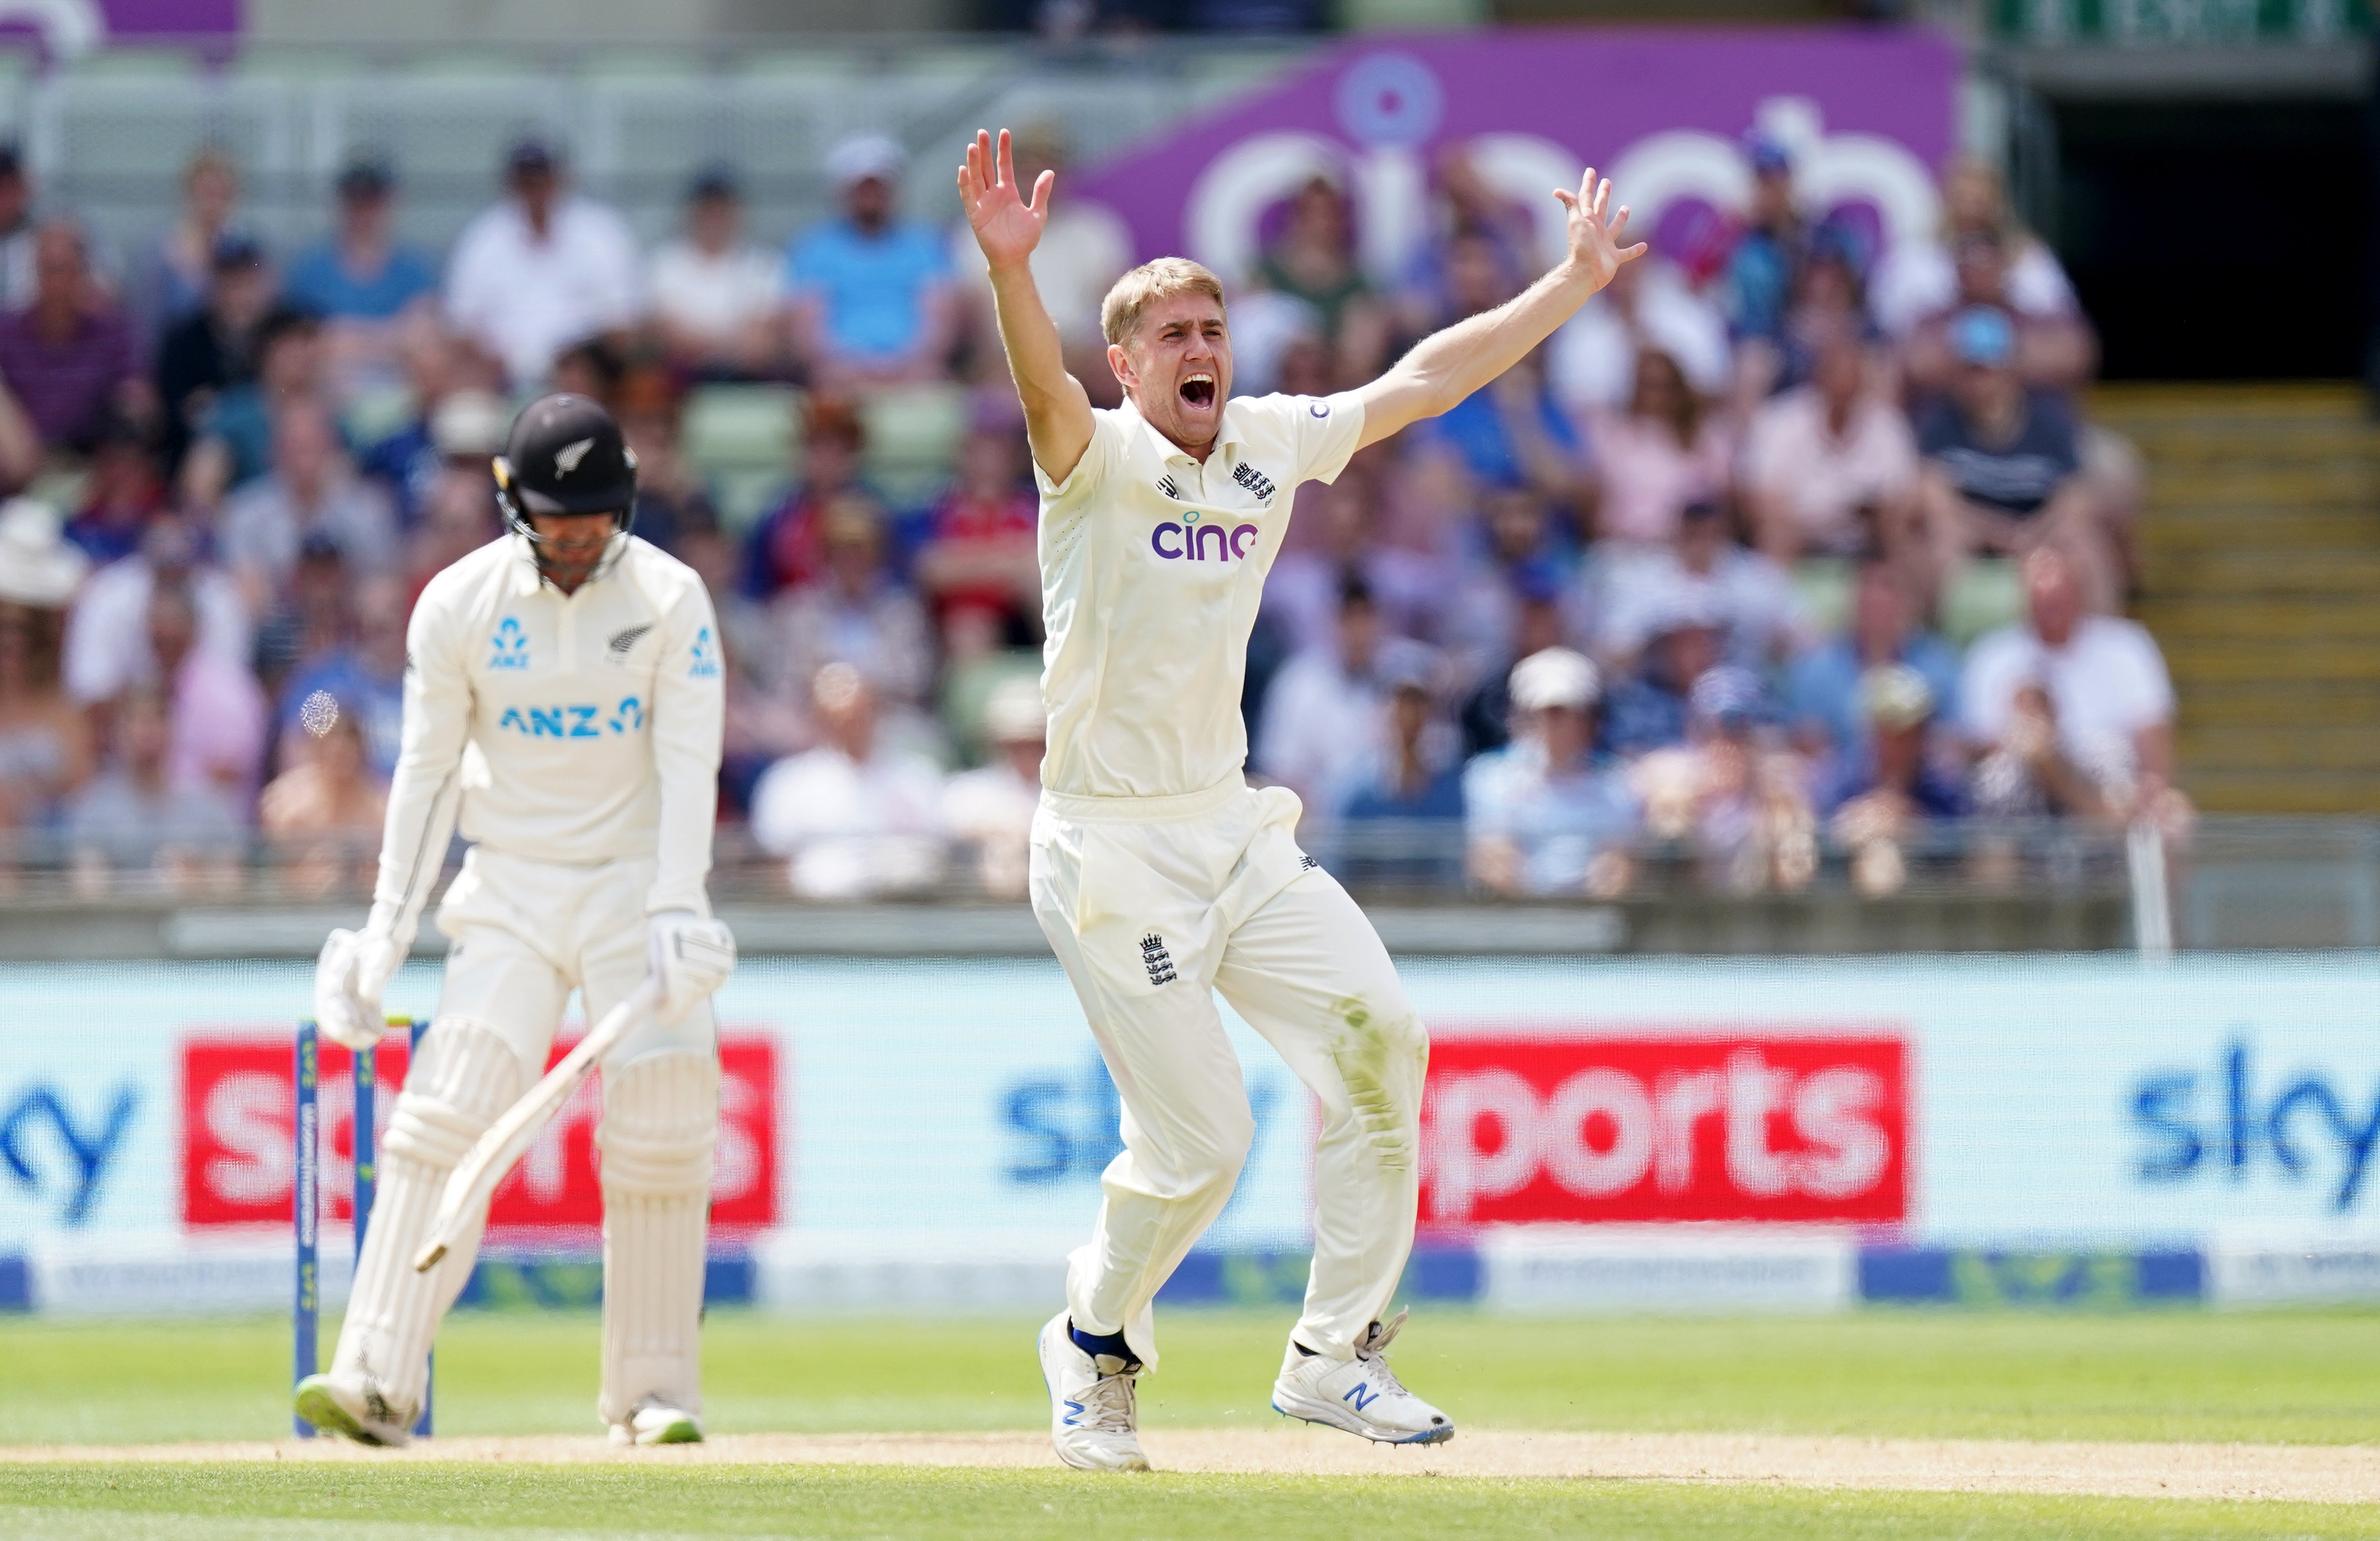 England’s Olly Stone appeals unsuccessfully for the wicket of New Zealand’s Tom Blundell